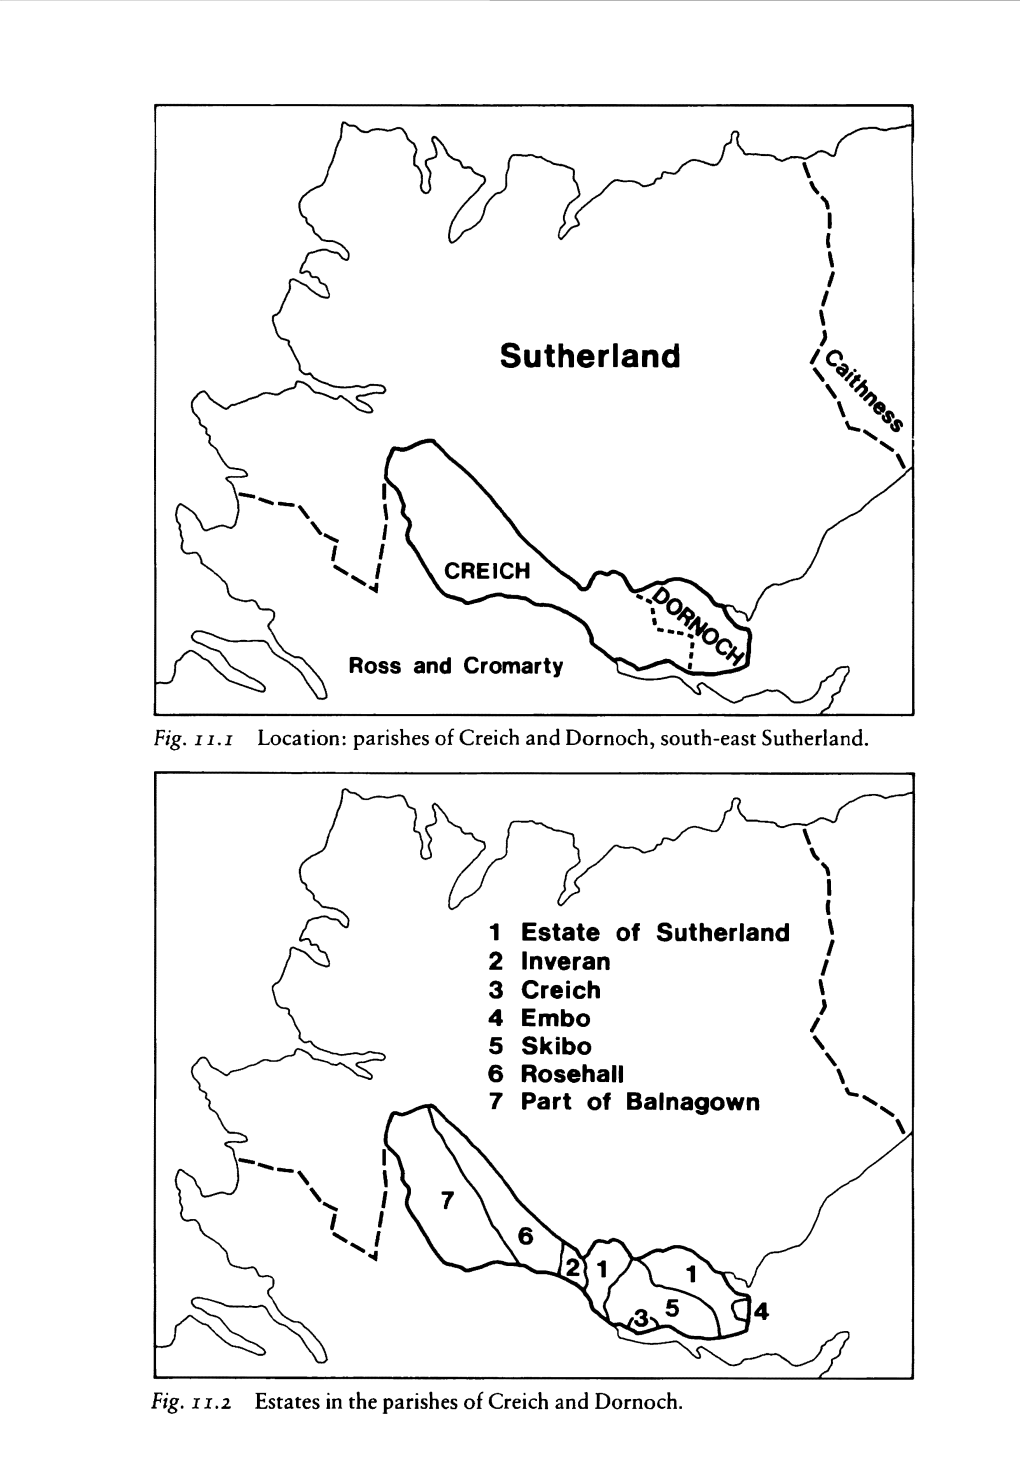 The Clearances in South-East Sutherland